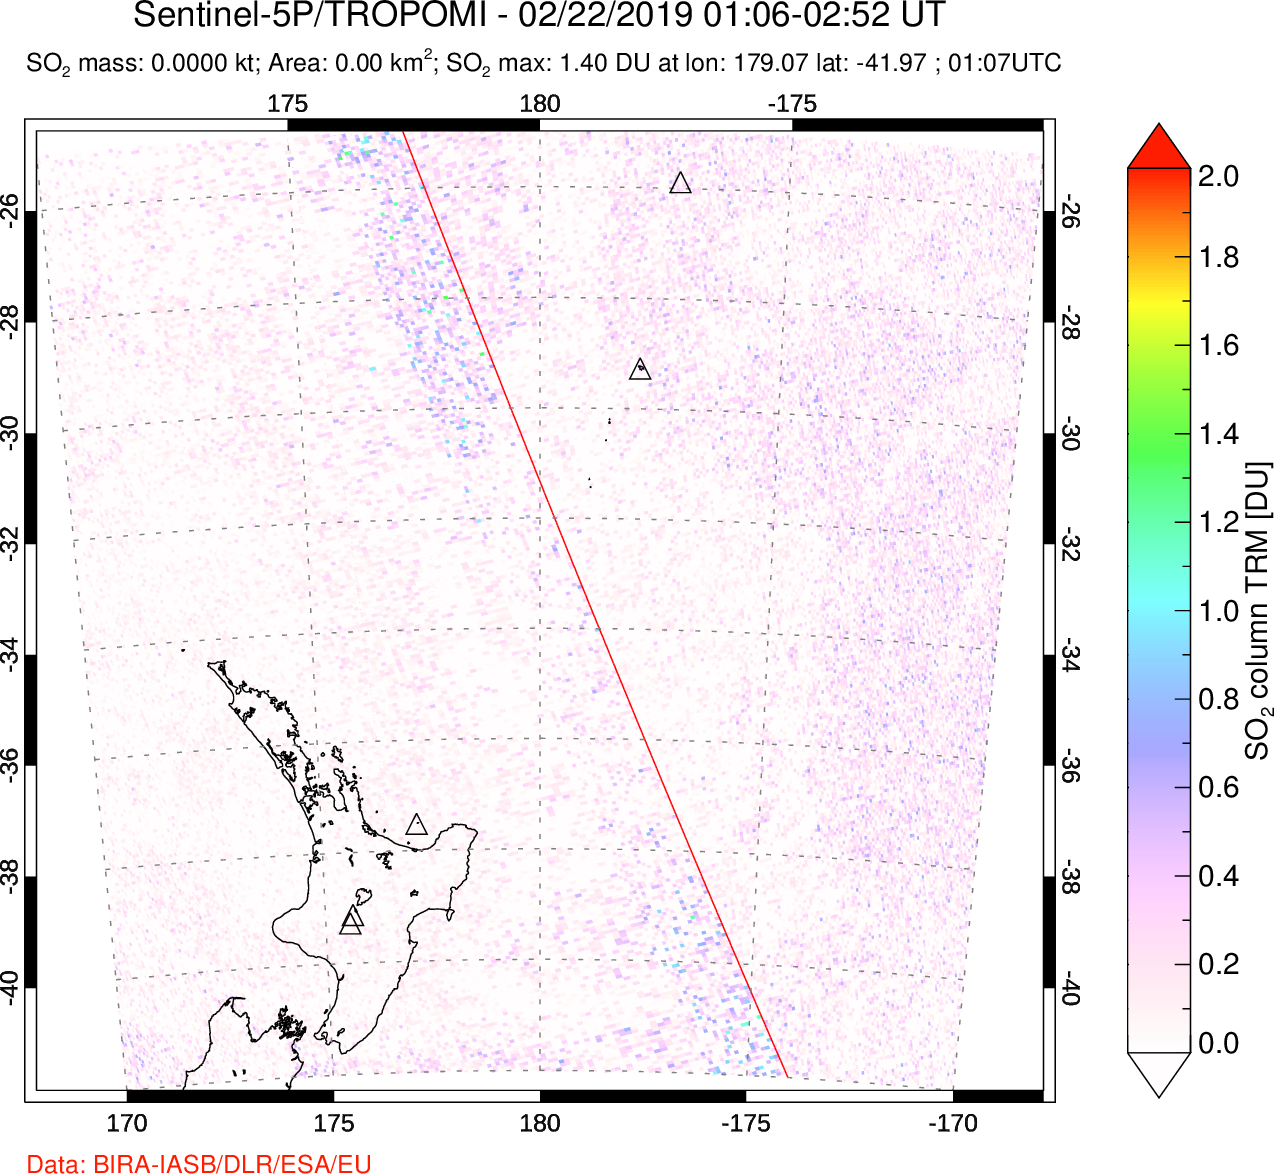 A sulfur dioxide image over New Zealand on Feb 22, 2019.